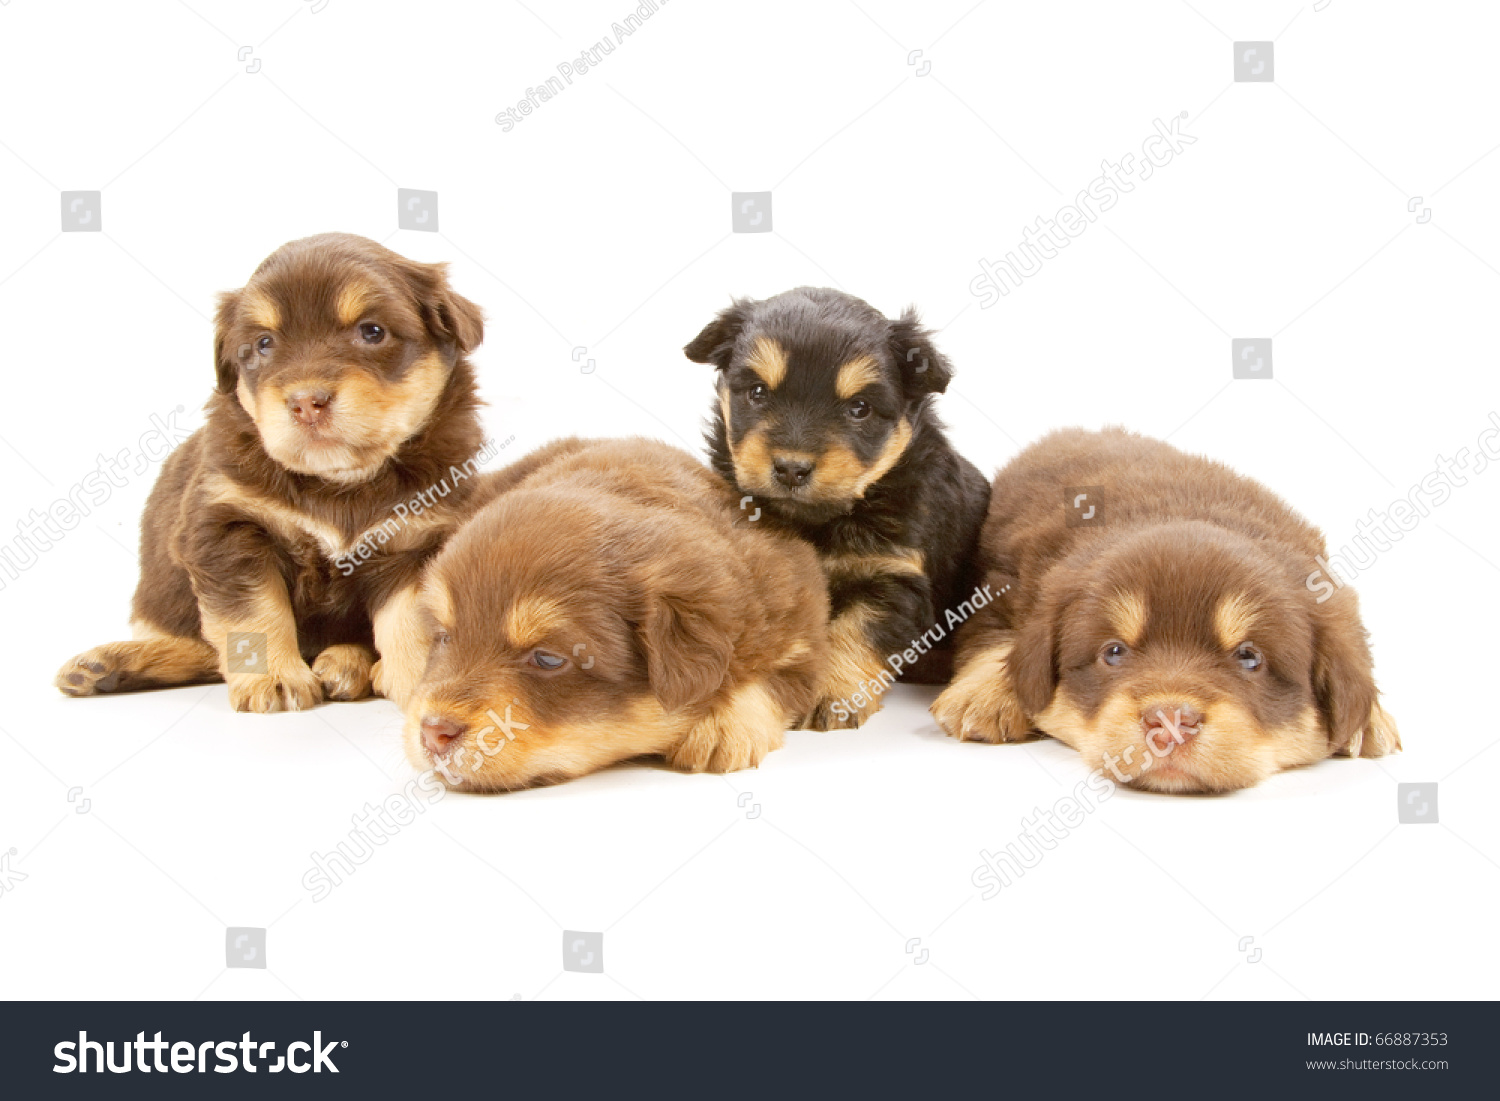 Adorable Puppies Isolated On White Background Stock Photo 66887353